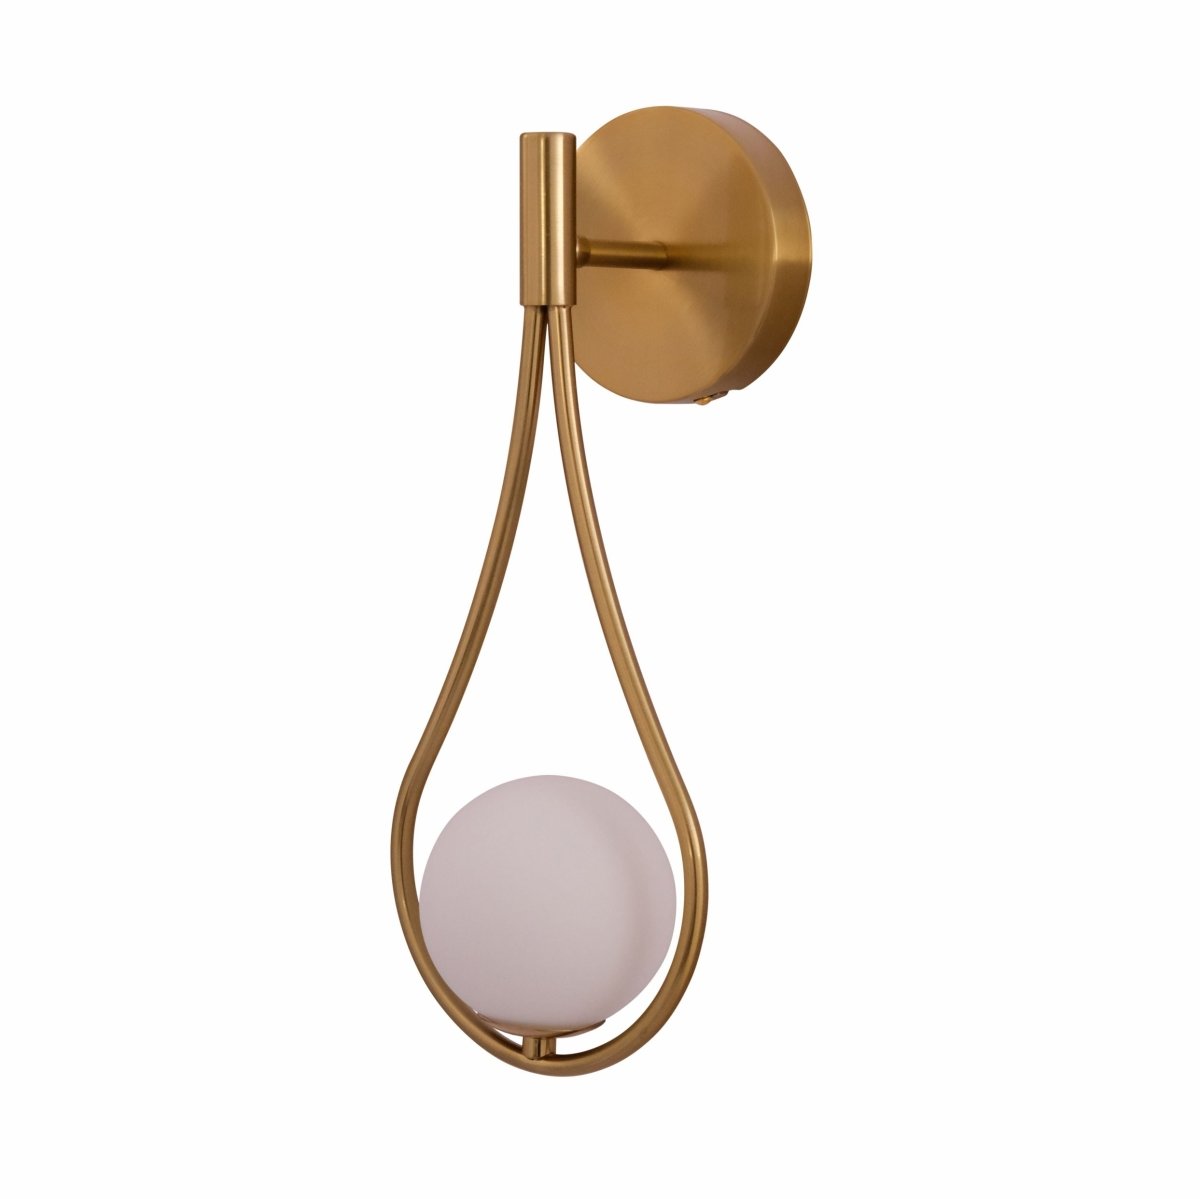 Main image of Opal Glass Gold Metal Globe Wall Light with G9 Fitting | TEKLED 151-19740